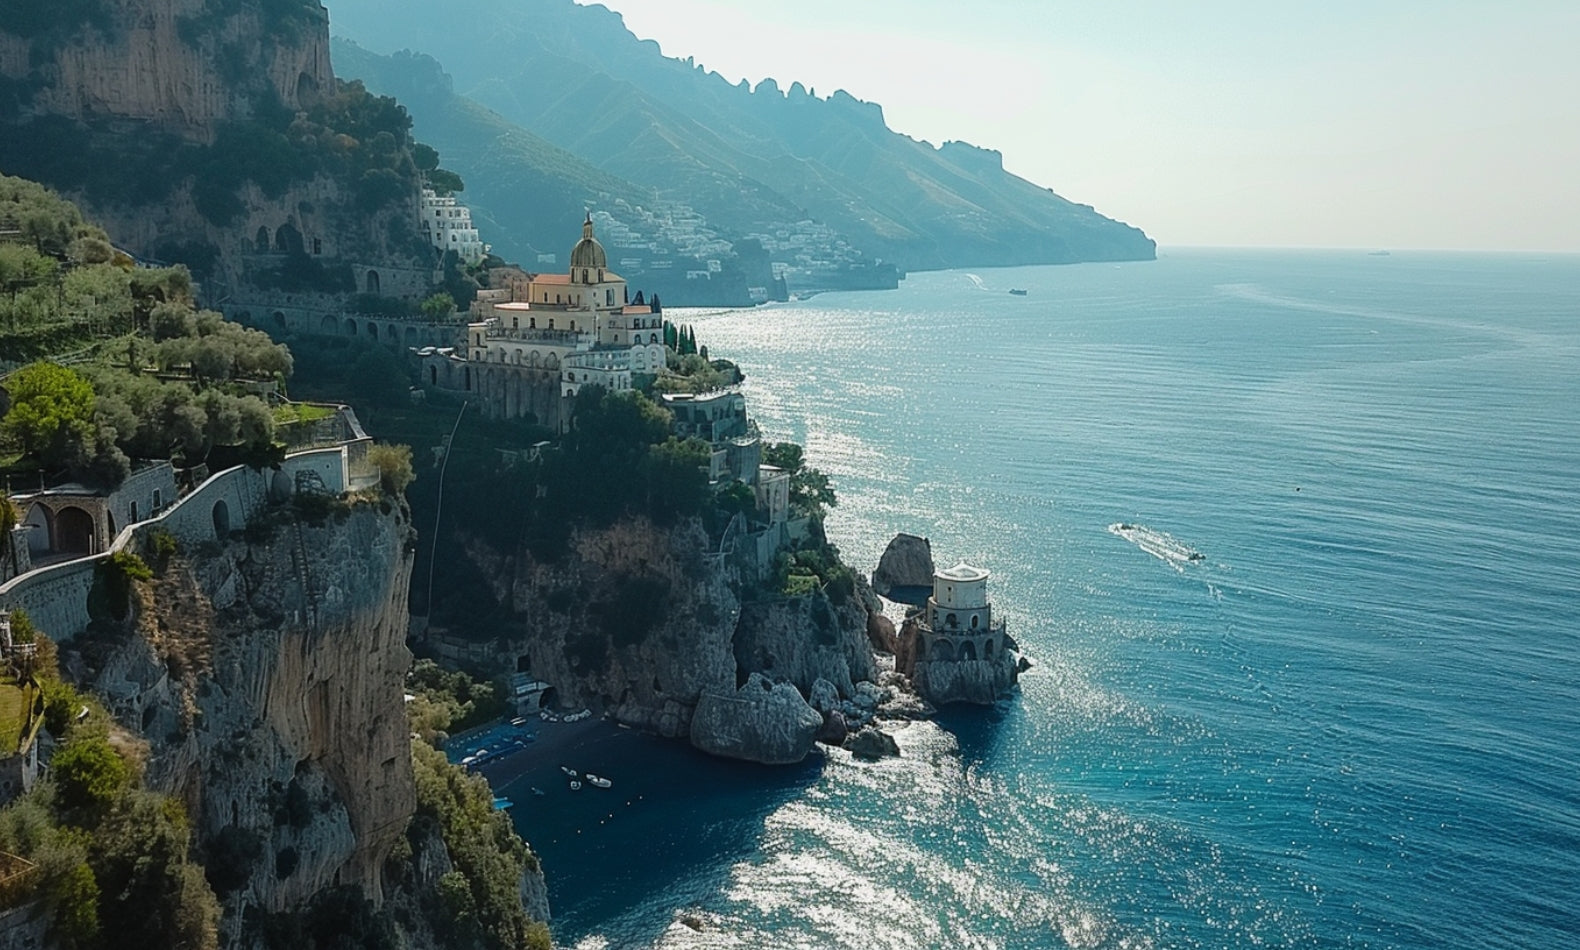 drone image of the amalfi coast of italy showing the lustrous ocean and cityscape